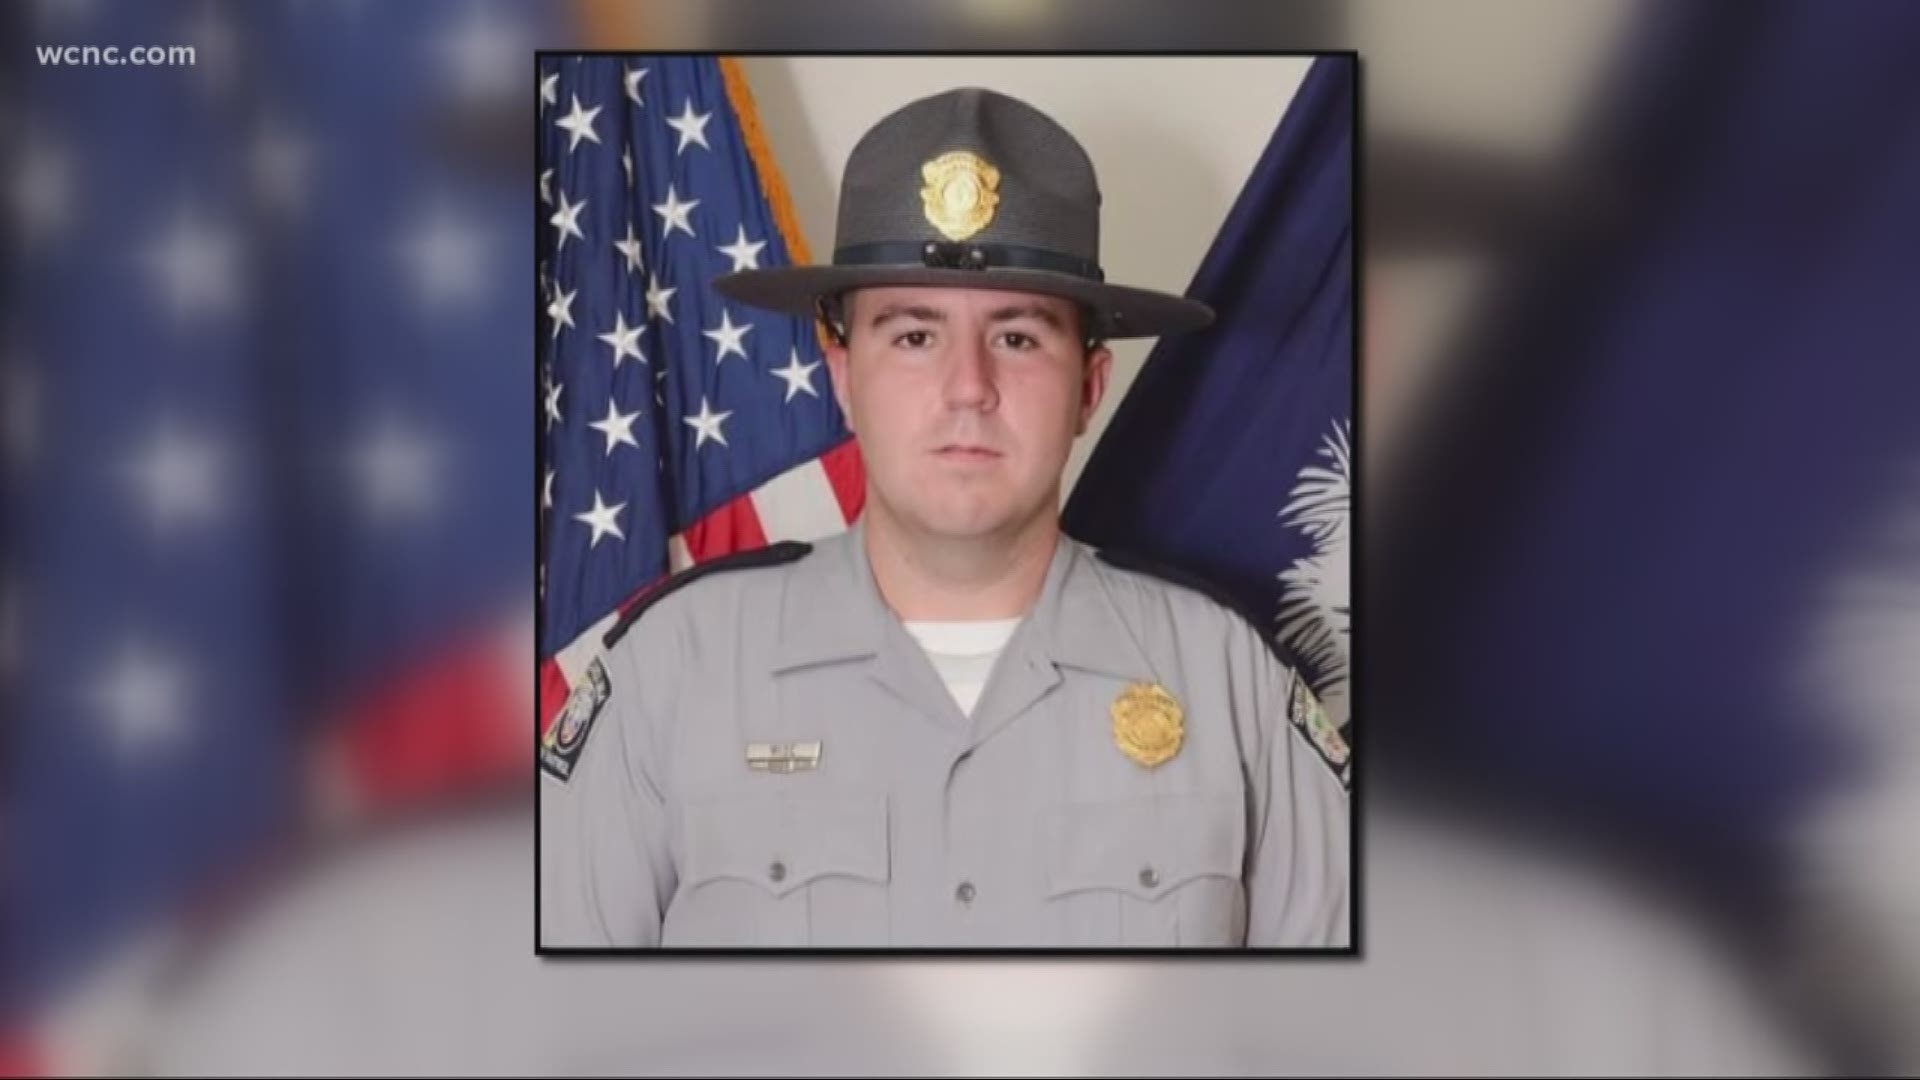 His chief says Trooper Wise will take a break for a bit, take a chance to hug his wife and young sons. But the shooting won't stop him from serving.